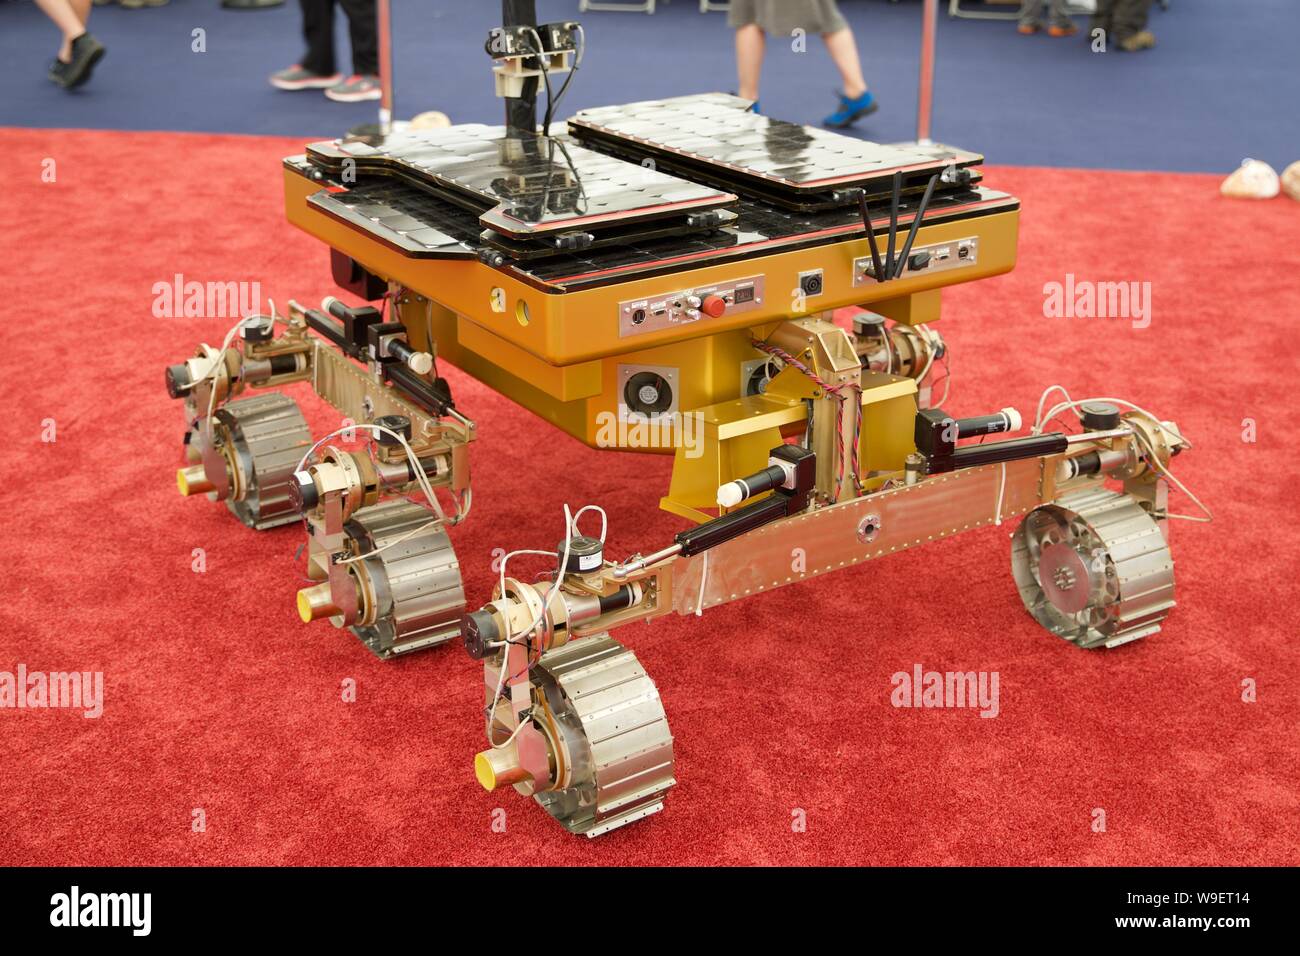 ExoMars Rover on display in the Techno Zone at the 2019 Royal International Air Tattoo Stock Photo